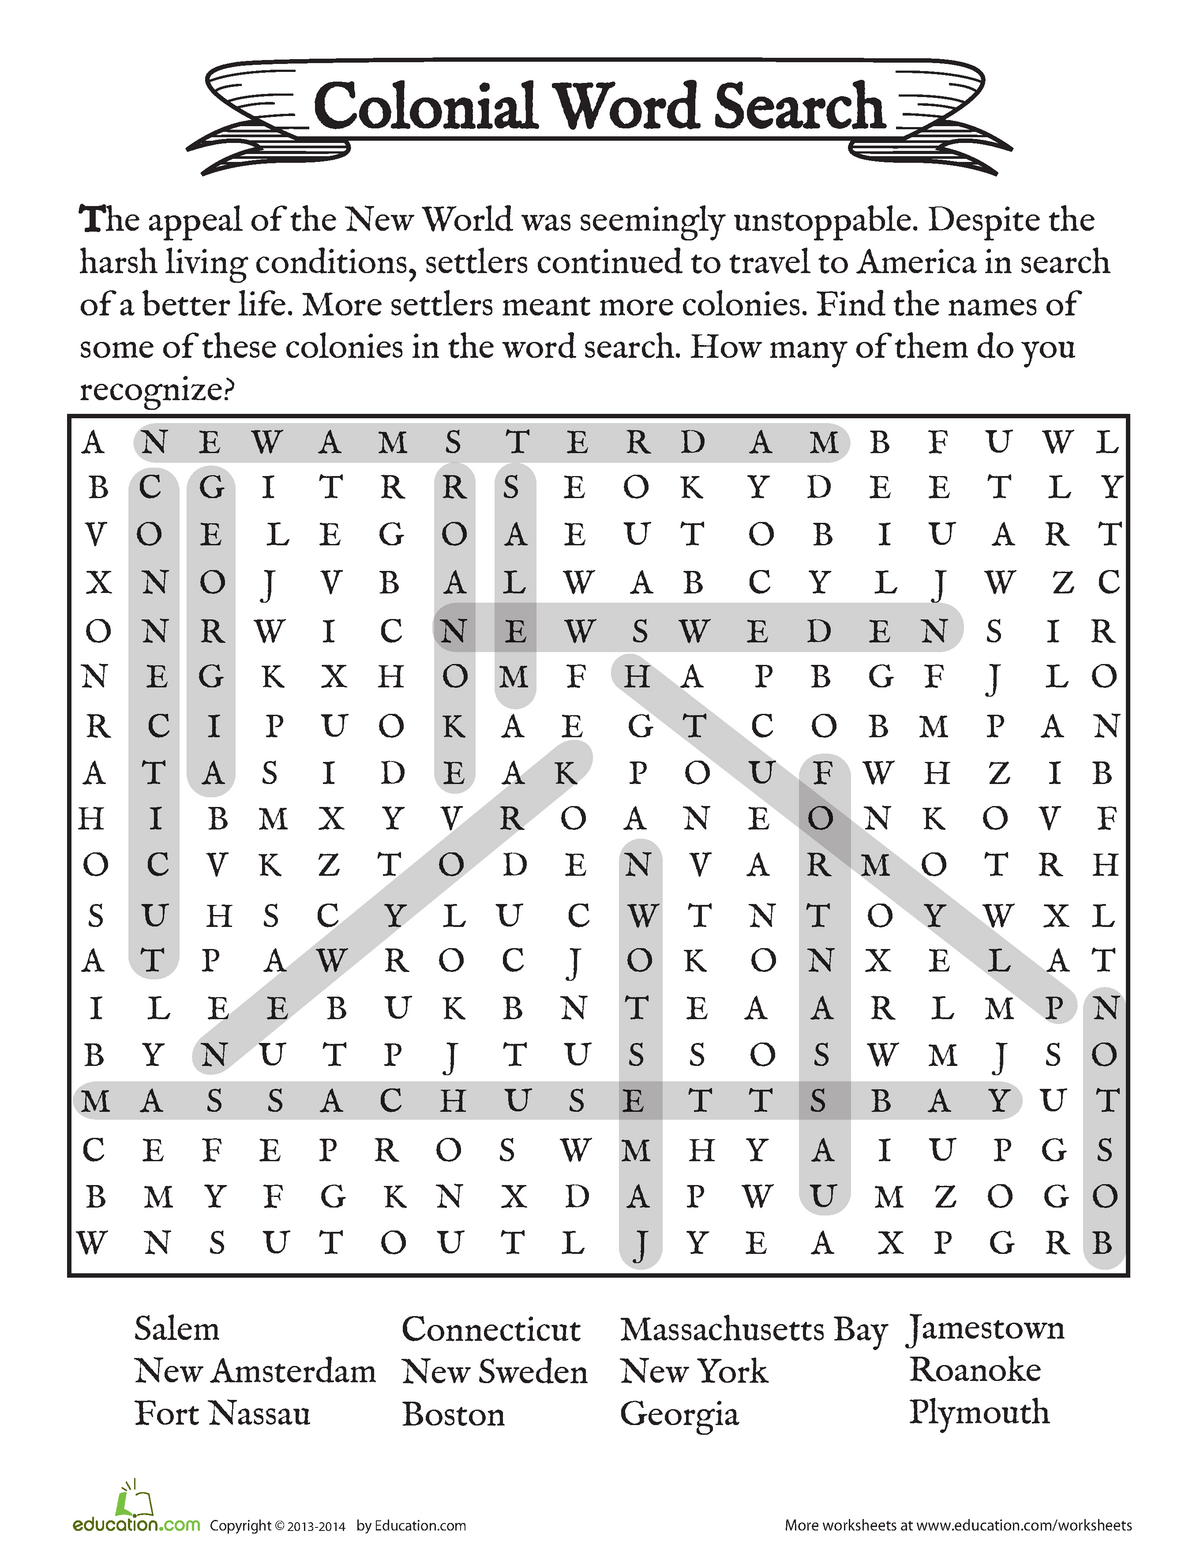 Colonial Word Search Answer Key Copyright © 20102011 by Education